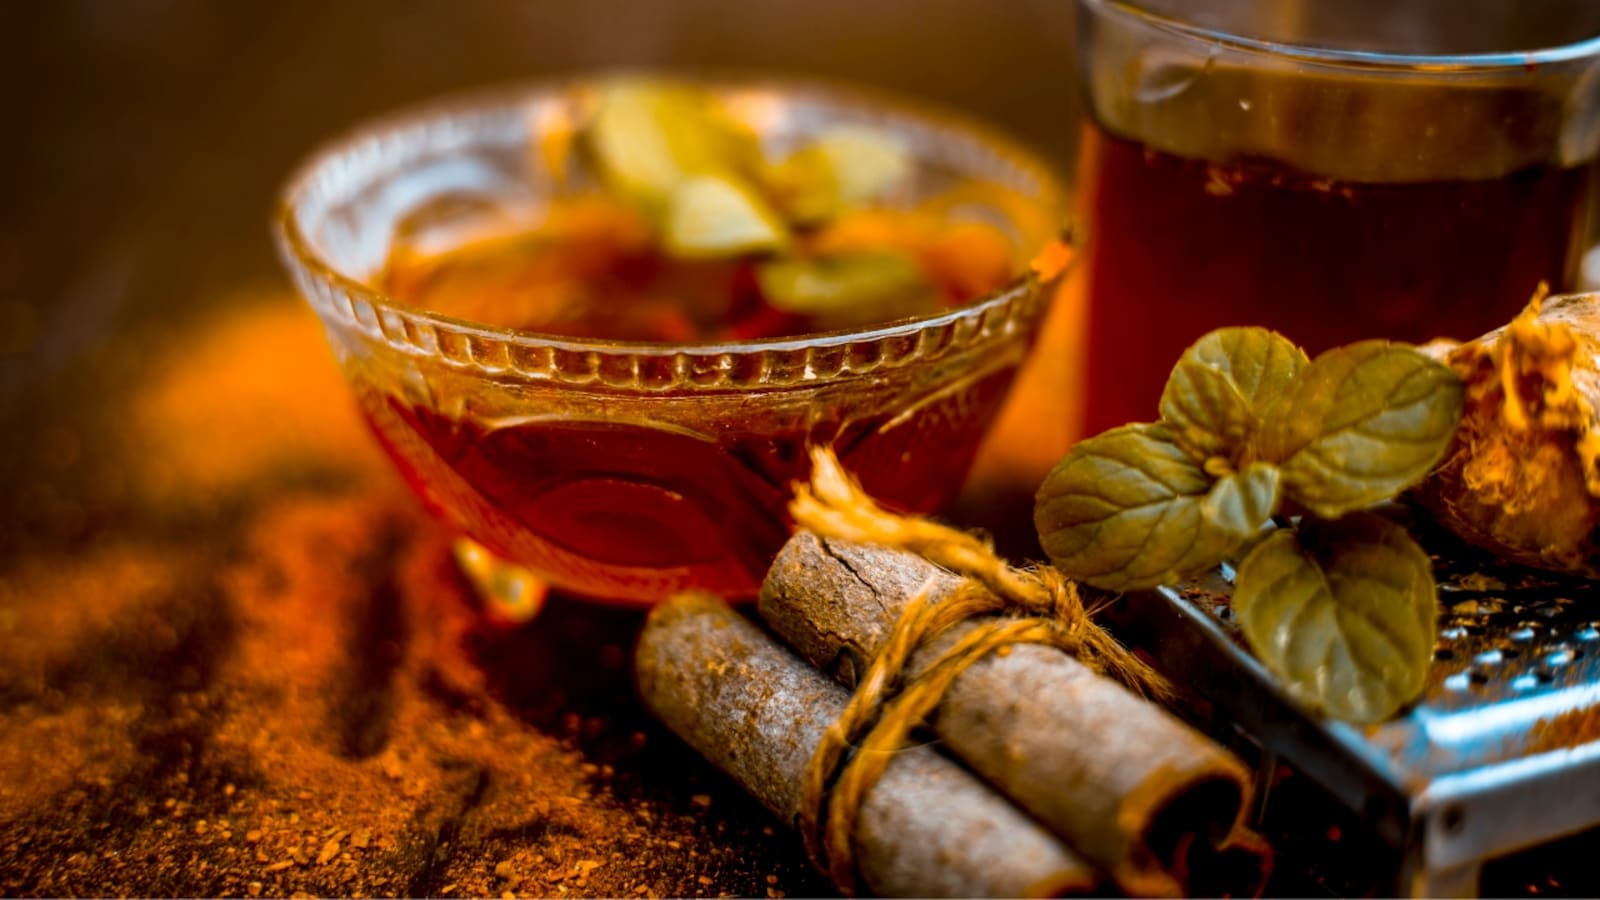 5 amazing health benefits of drinking cinnamon water on an empty stomach